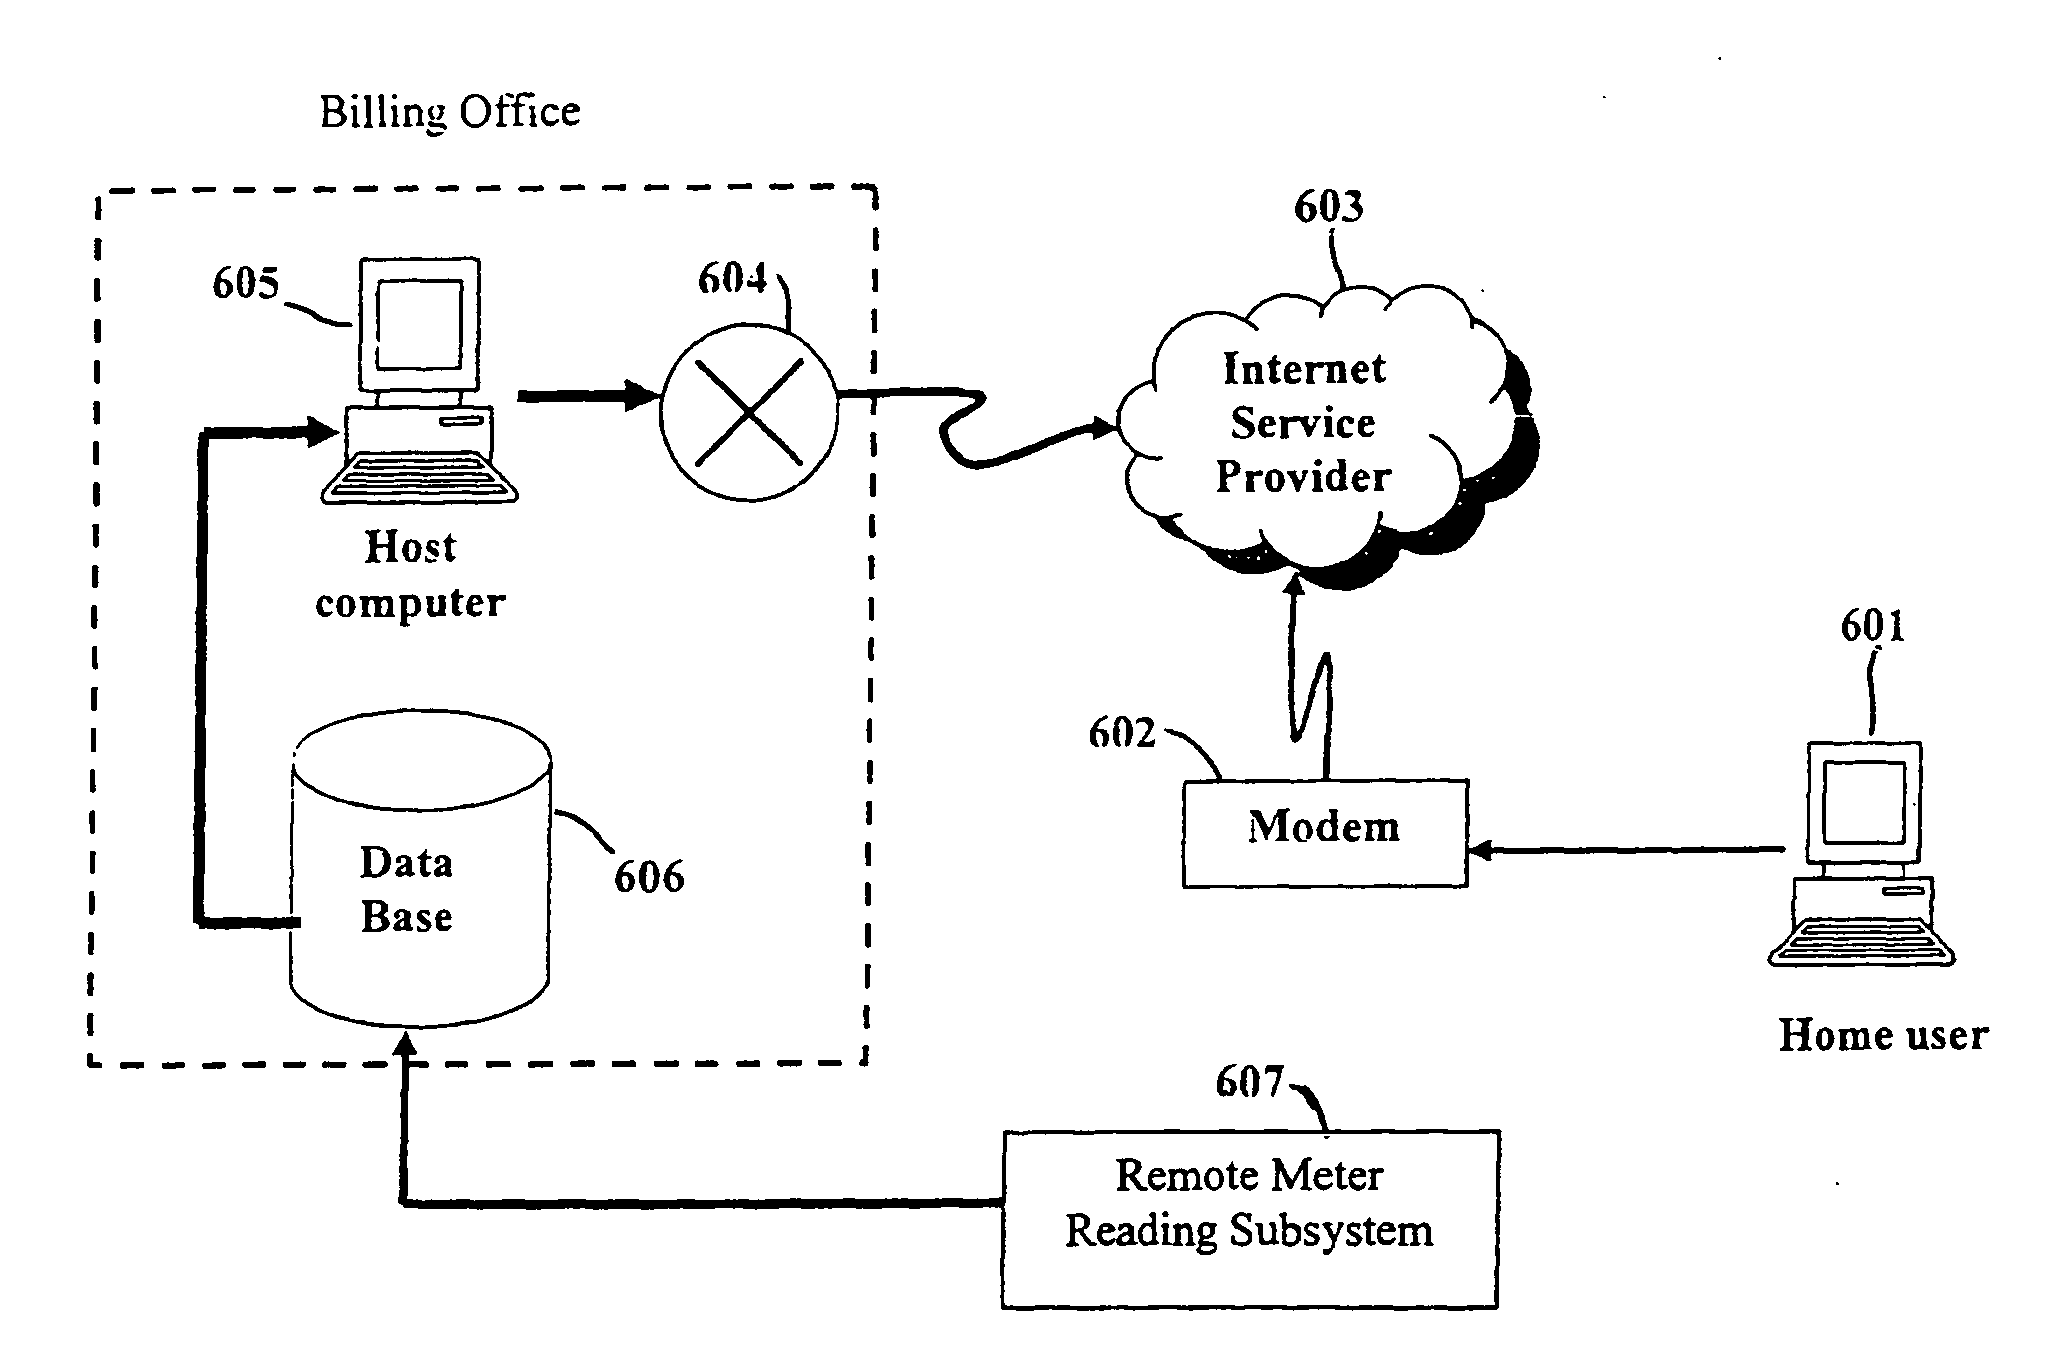 Remote meter reading using the existing mobile network